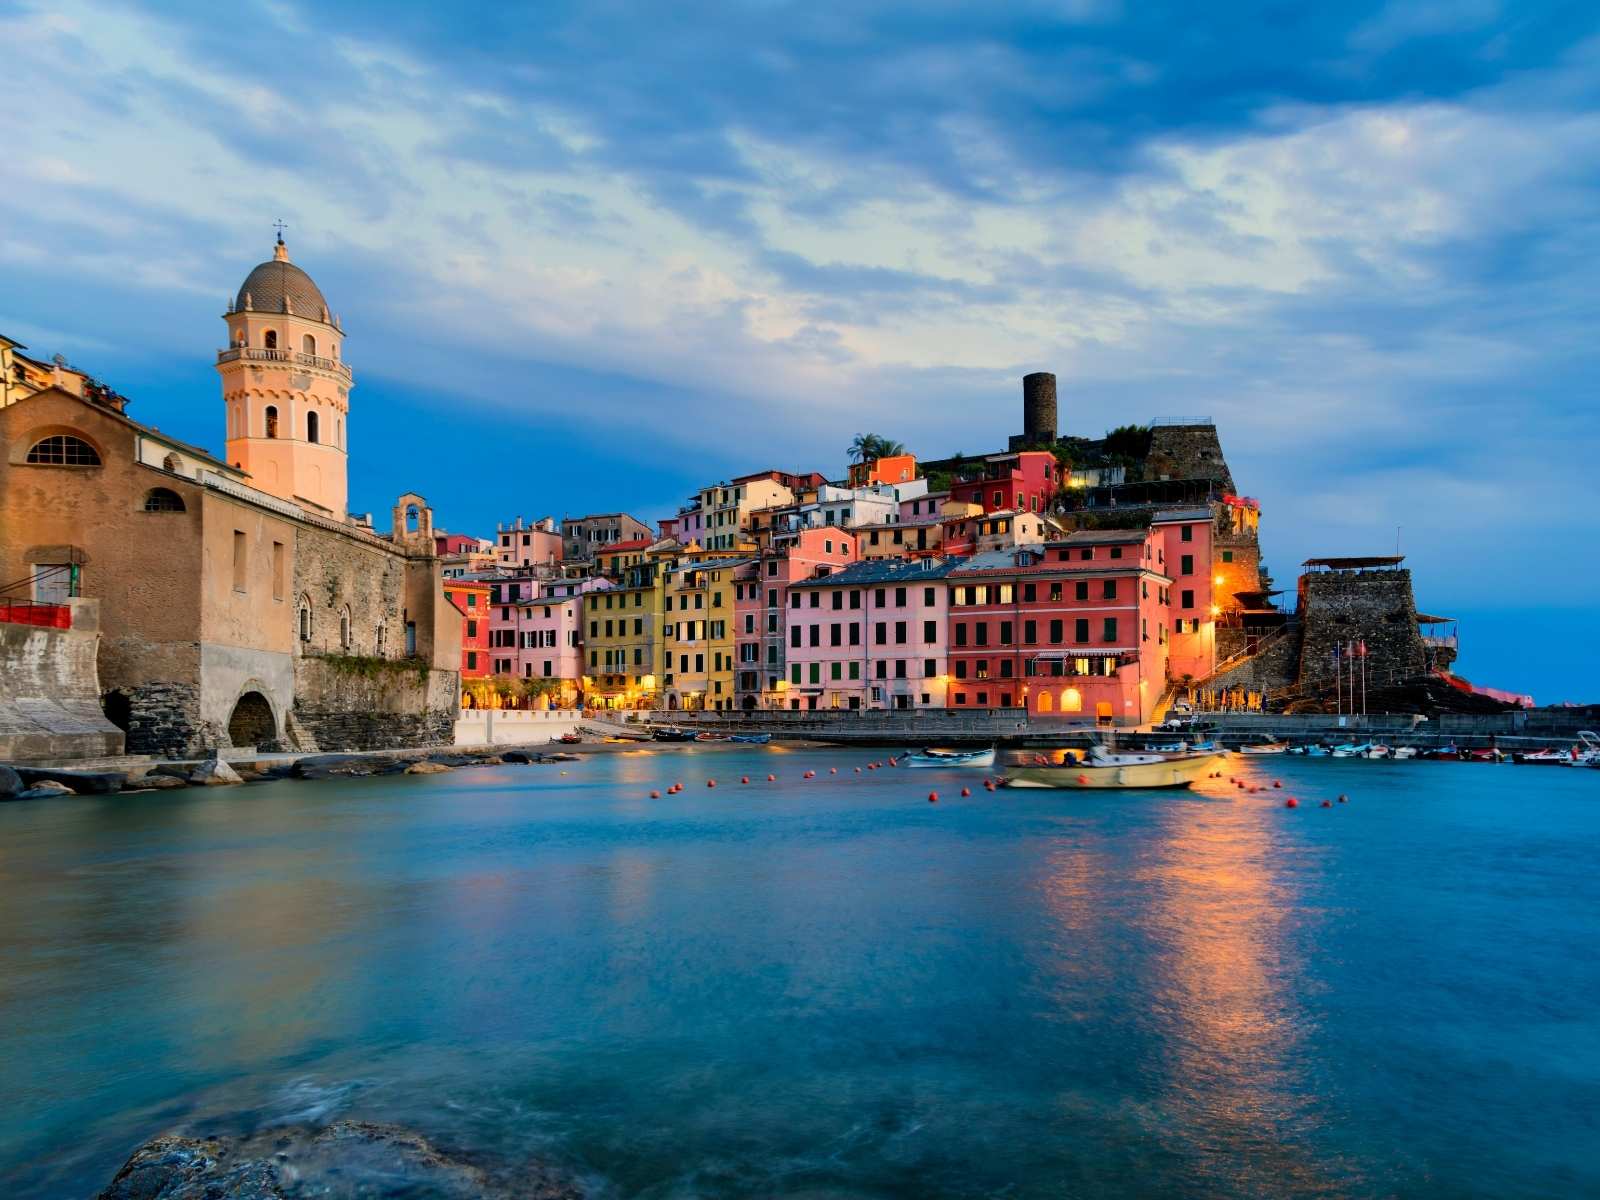 view of Vernazza from the water